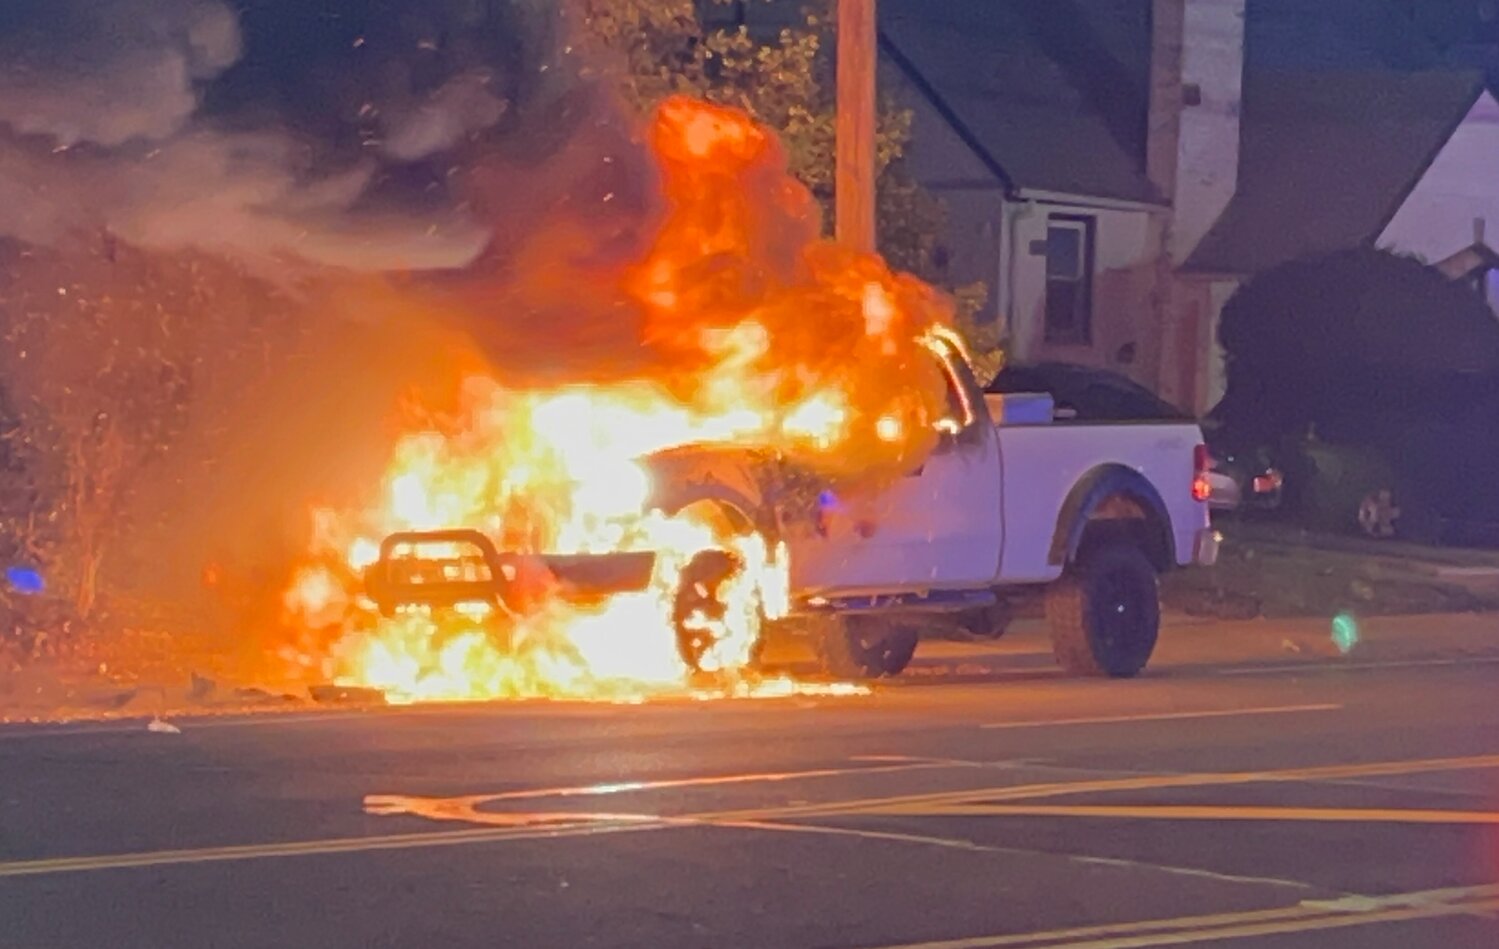 The Lynbrook and Malverne fire departments arrived on the scene to find a pickup truck fully engulfed in flames.